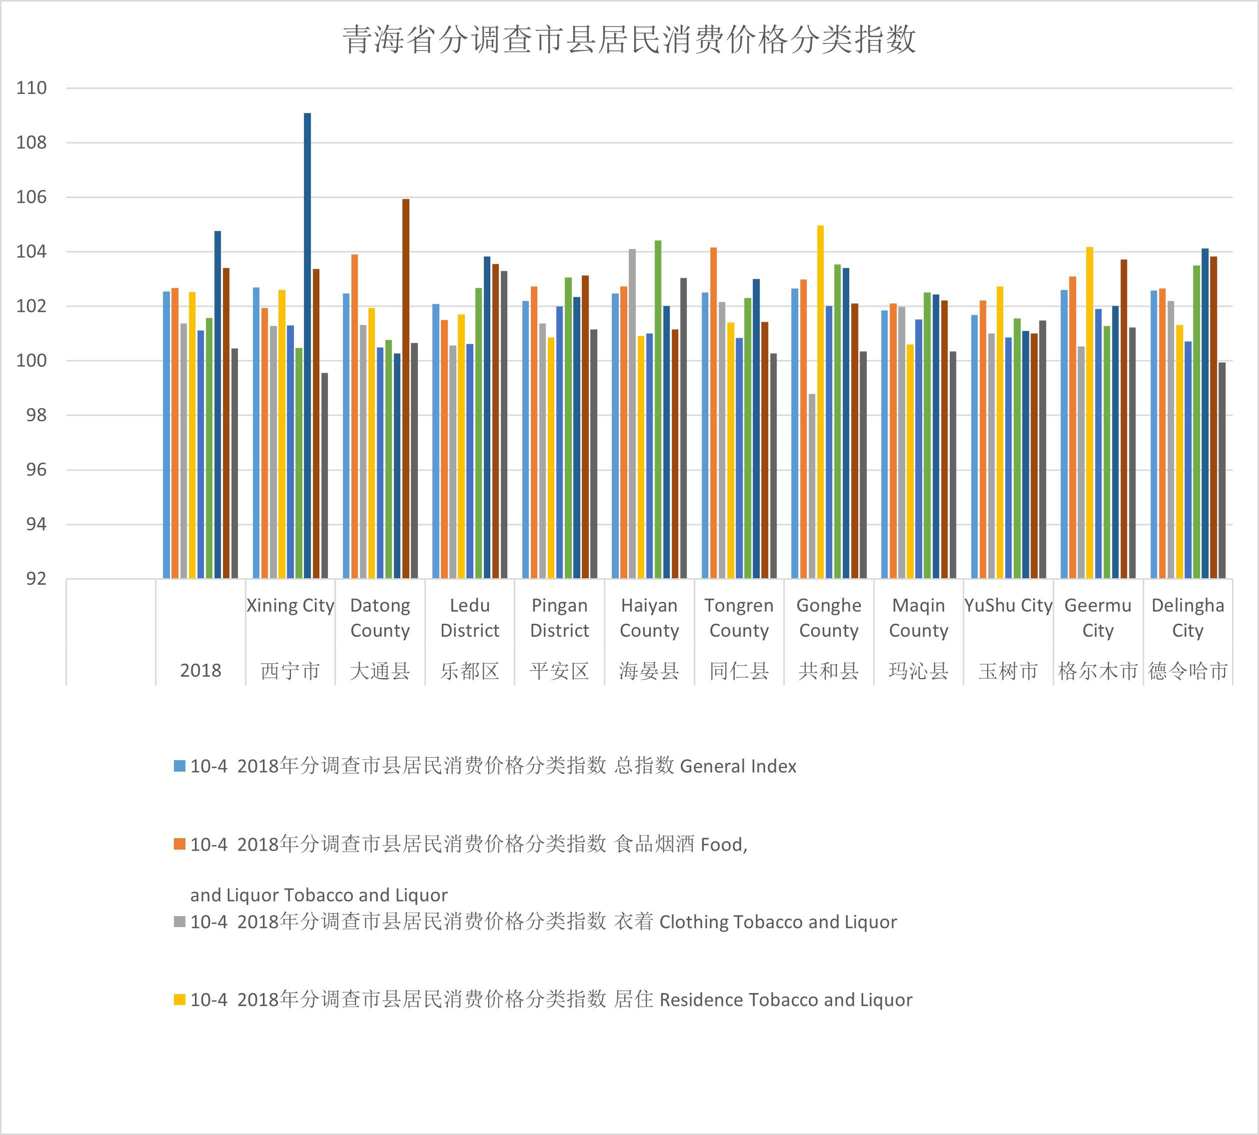 Consumer price index of cities and counties in Qinghai Province (2016-2020)